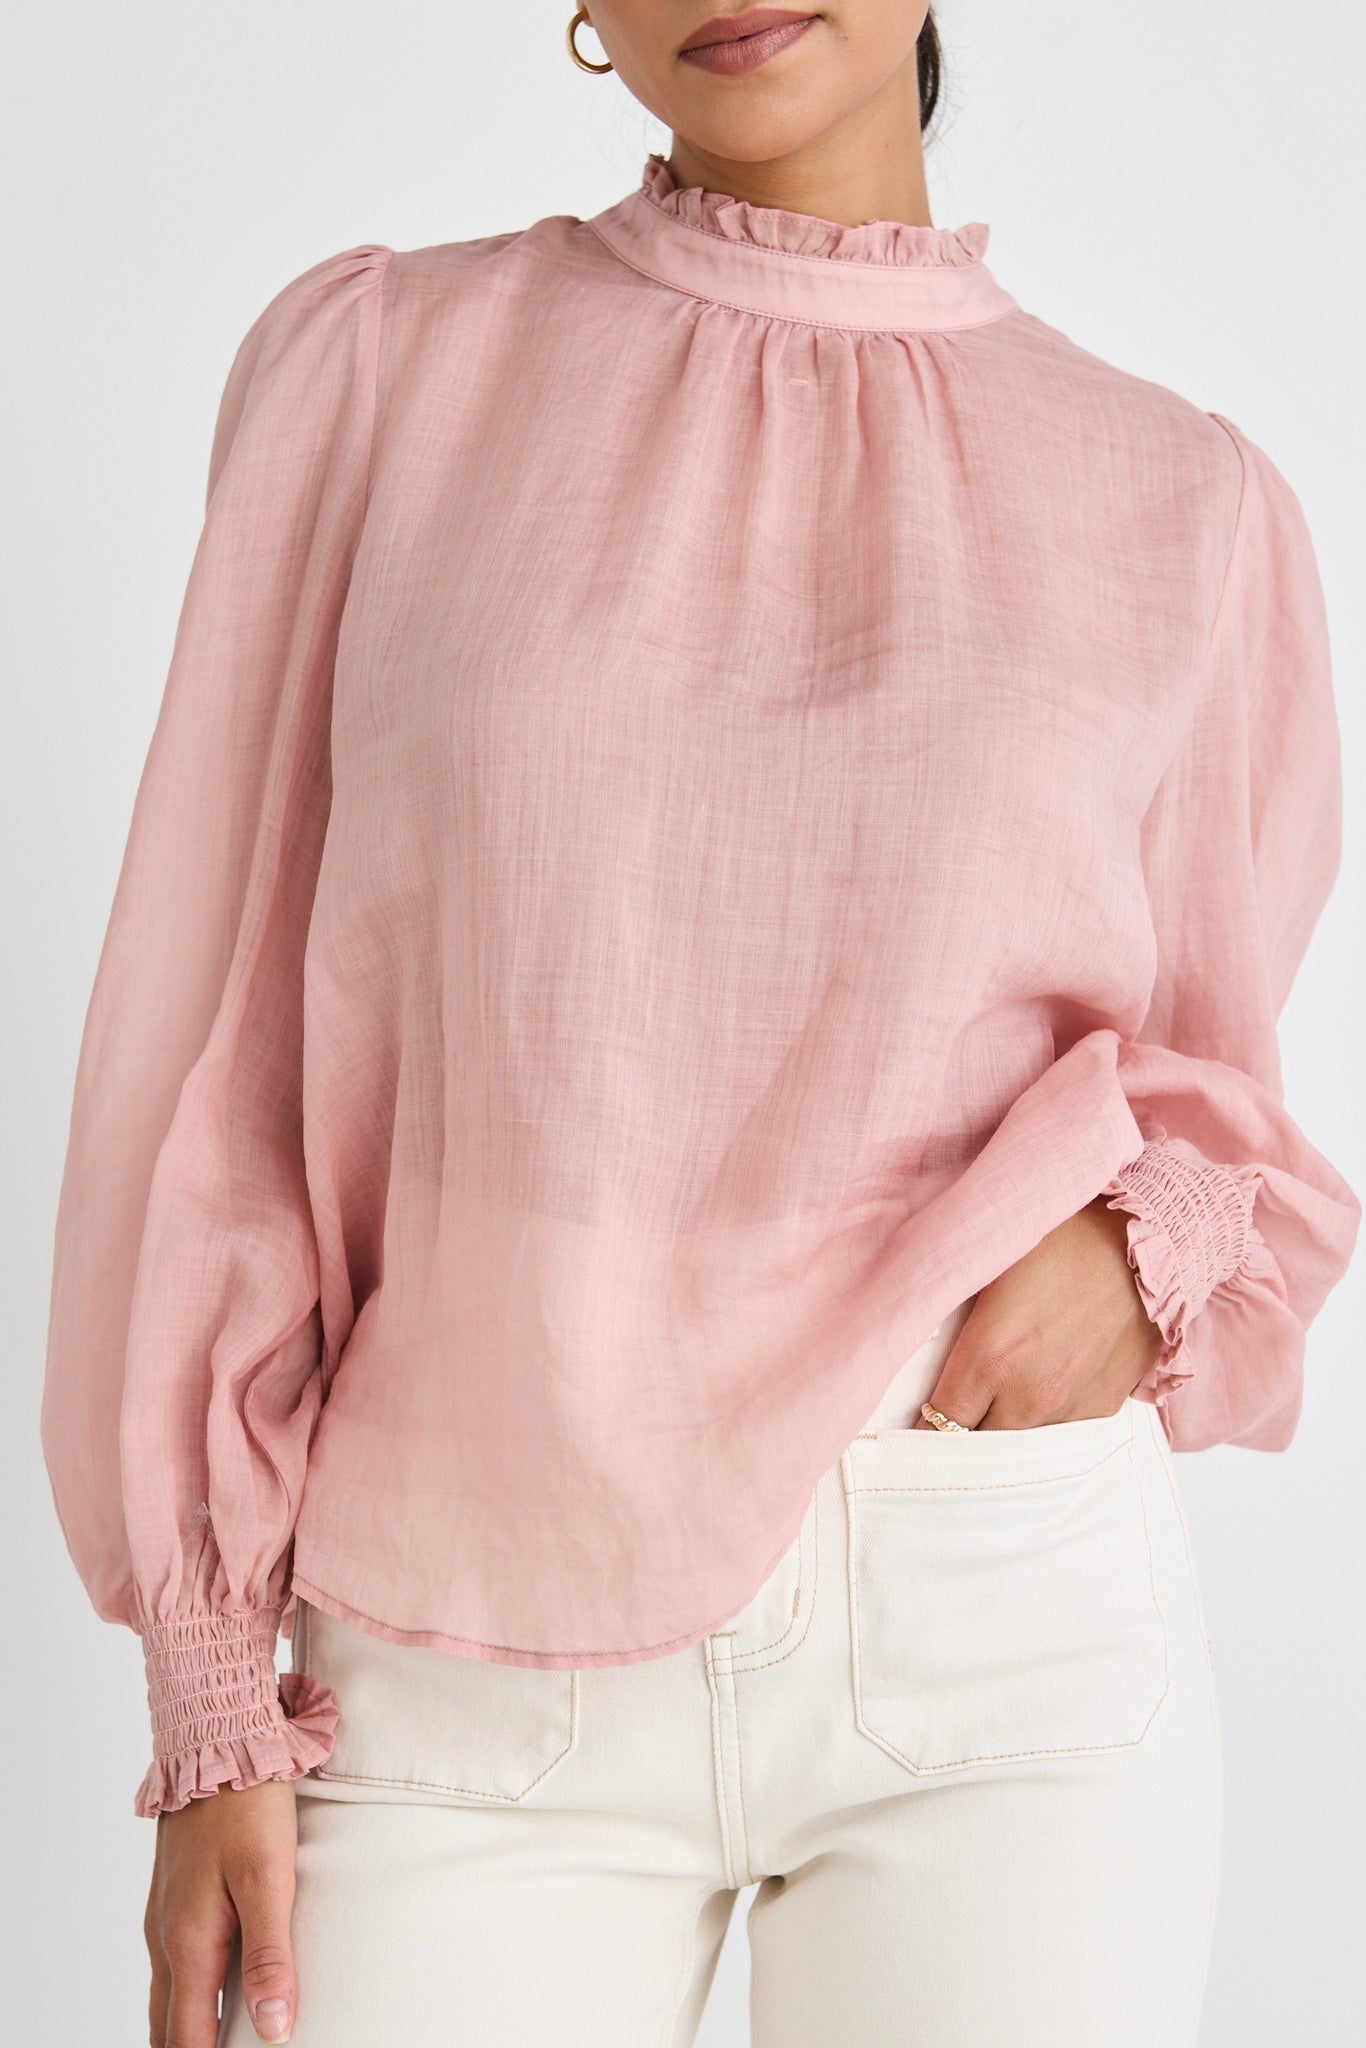 BY ROSA POET BLUSH SEMI SHEER HIGH NECK RELAXED TOP - BLUSH - THE VOGUE STORE